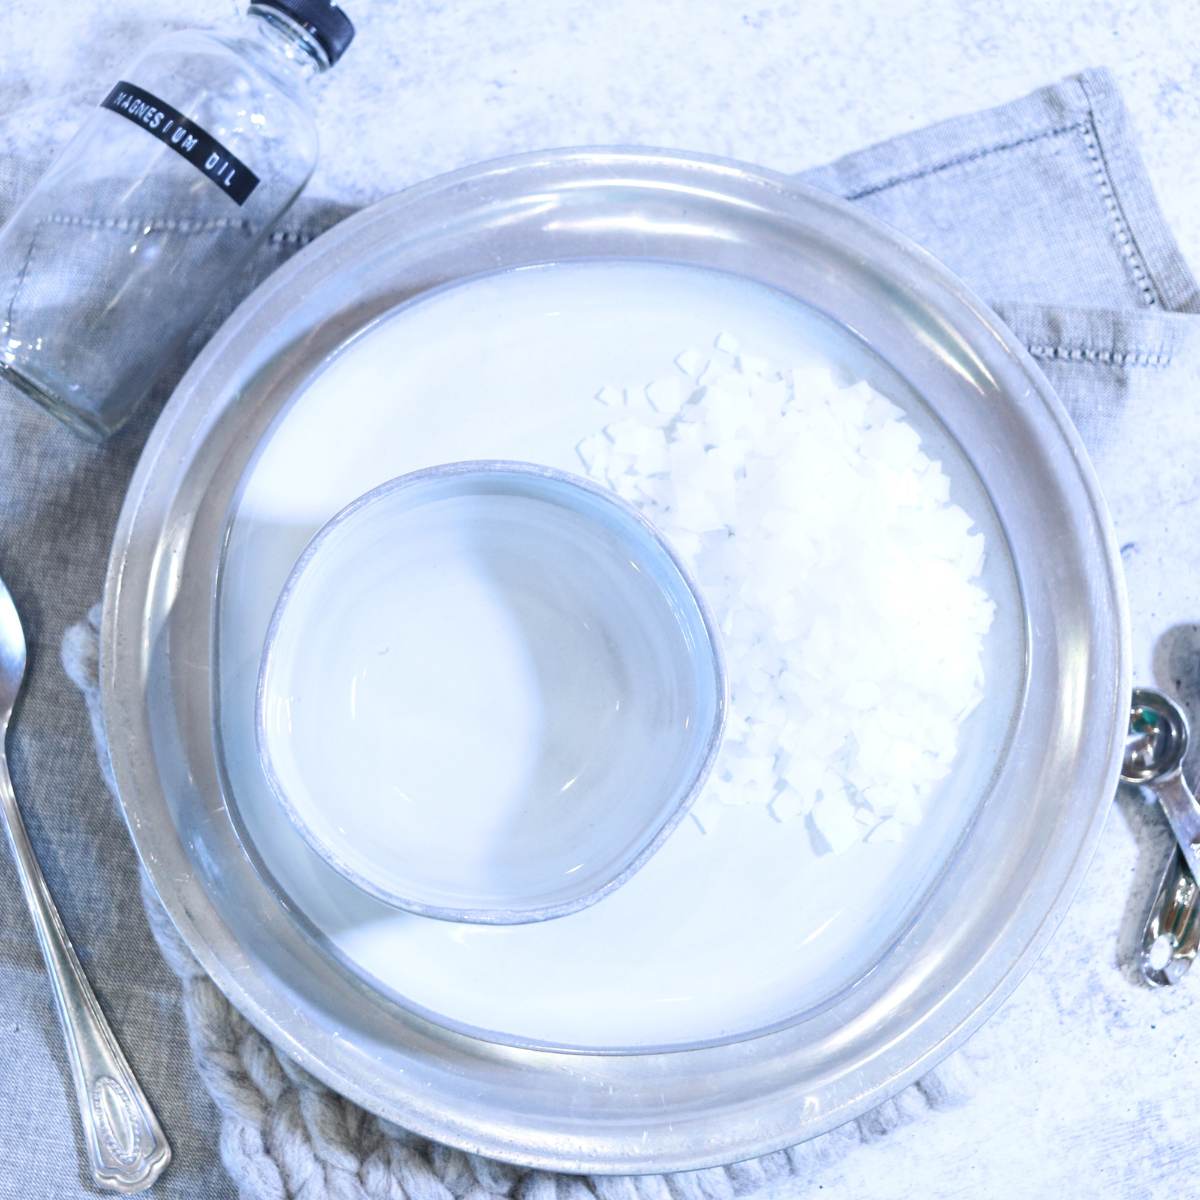 A table containing supplies for DIY magnesium oil recipe. A plate with white flaked magnesium flakes, a small bowl filled with distilled water, silver measuring spoons and a clear, empty bottle labeled magnesium oil ready to make the recipe.